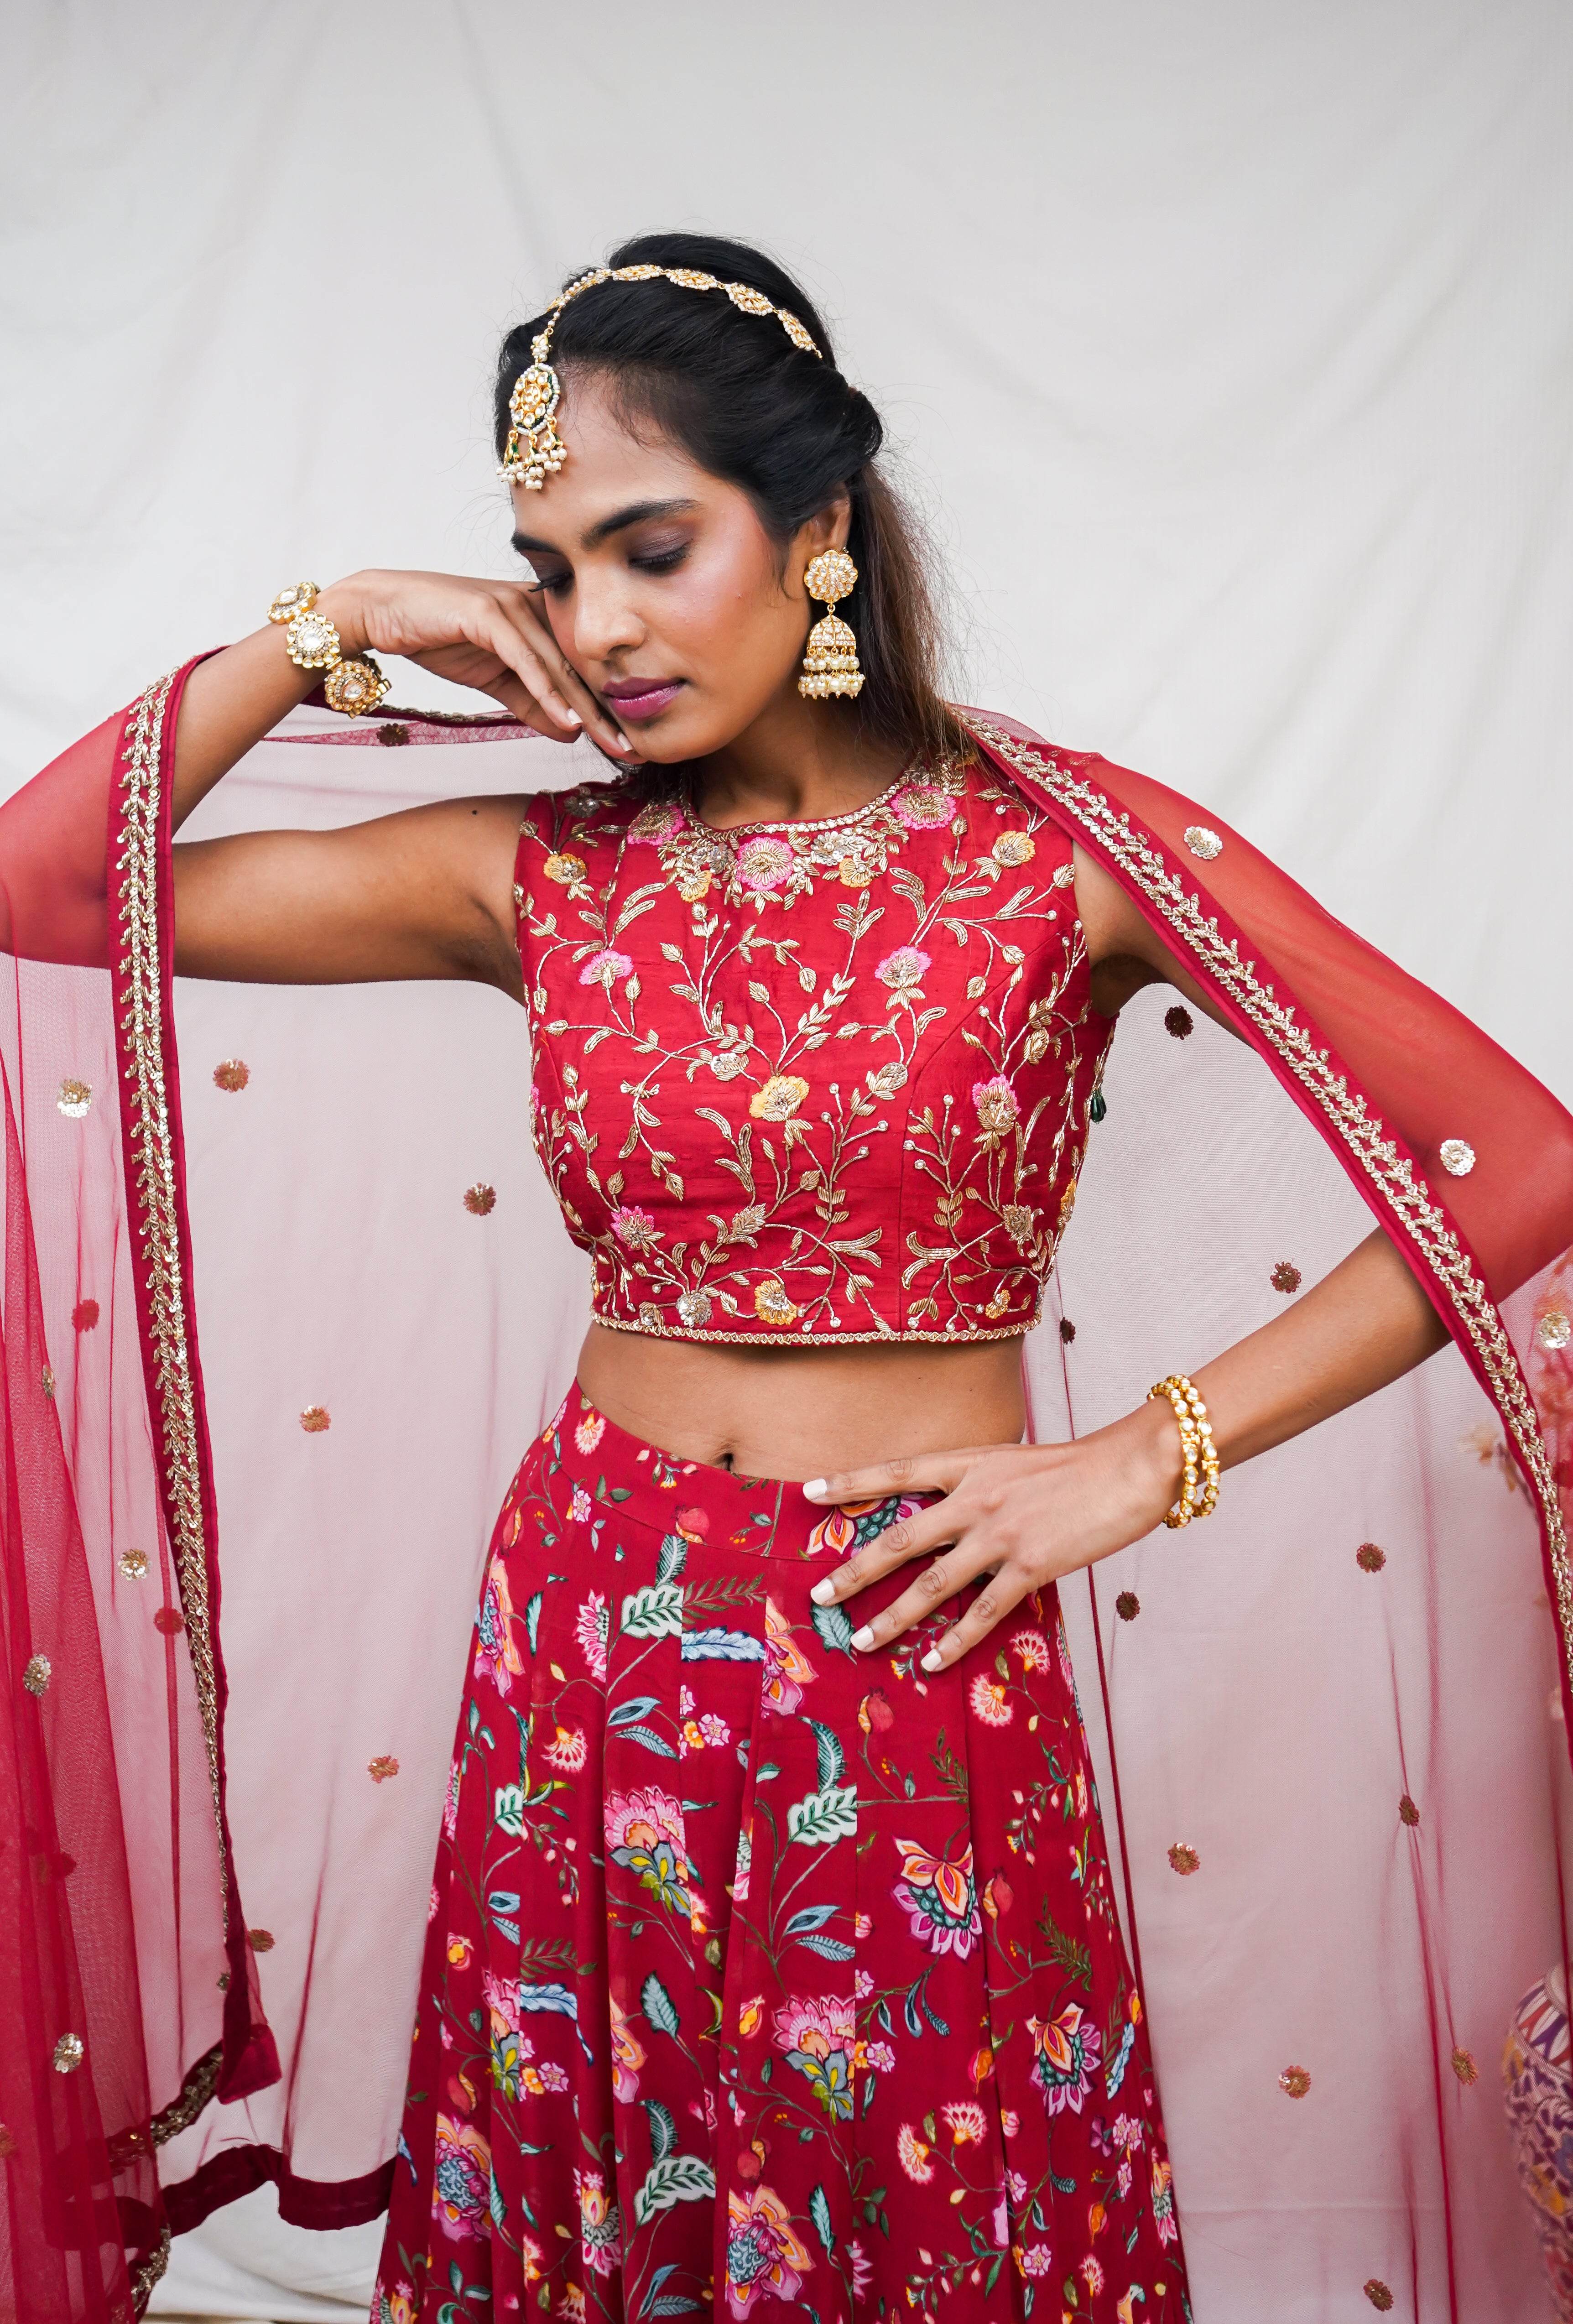 From High-Waist Lehengas To Saree-Drapes, 5 Trendy Bridal Lehenga Designs  For Fashionable Brides | Trends News, Times Now